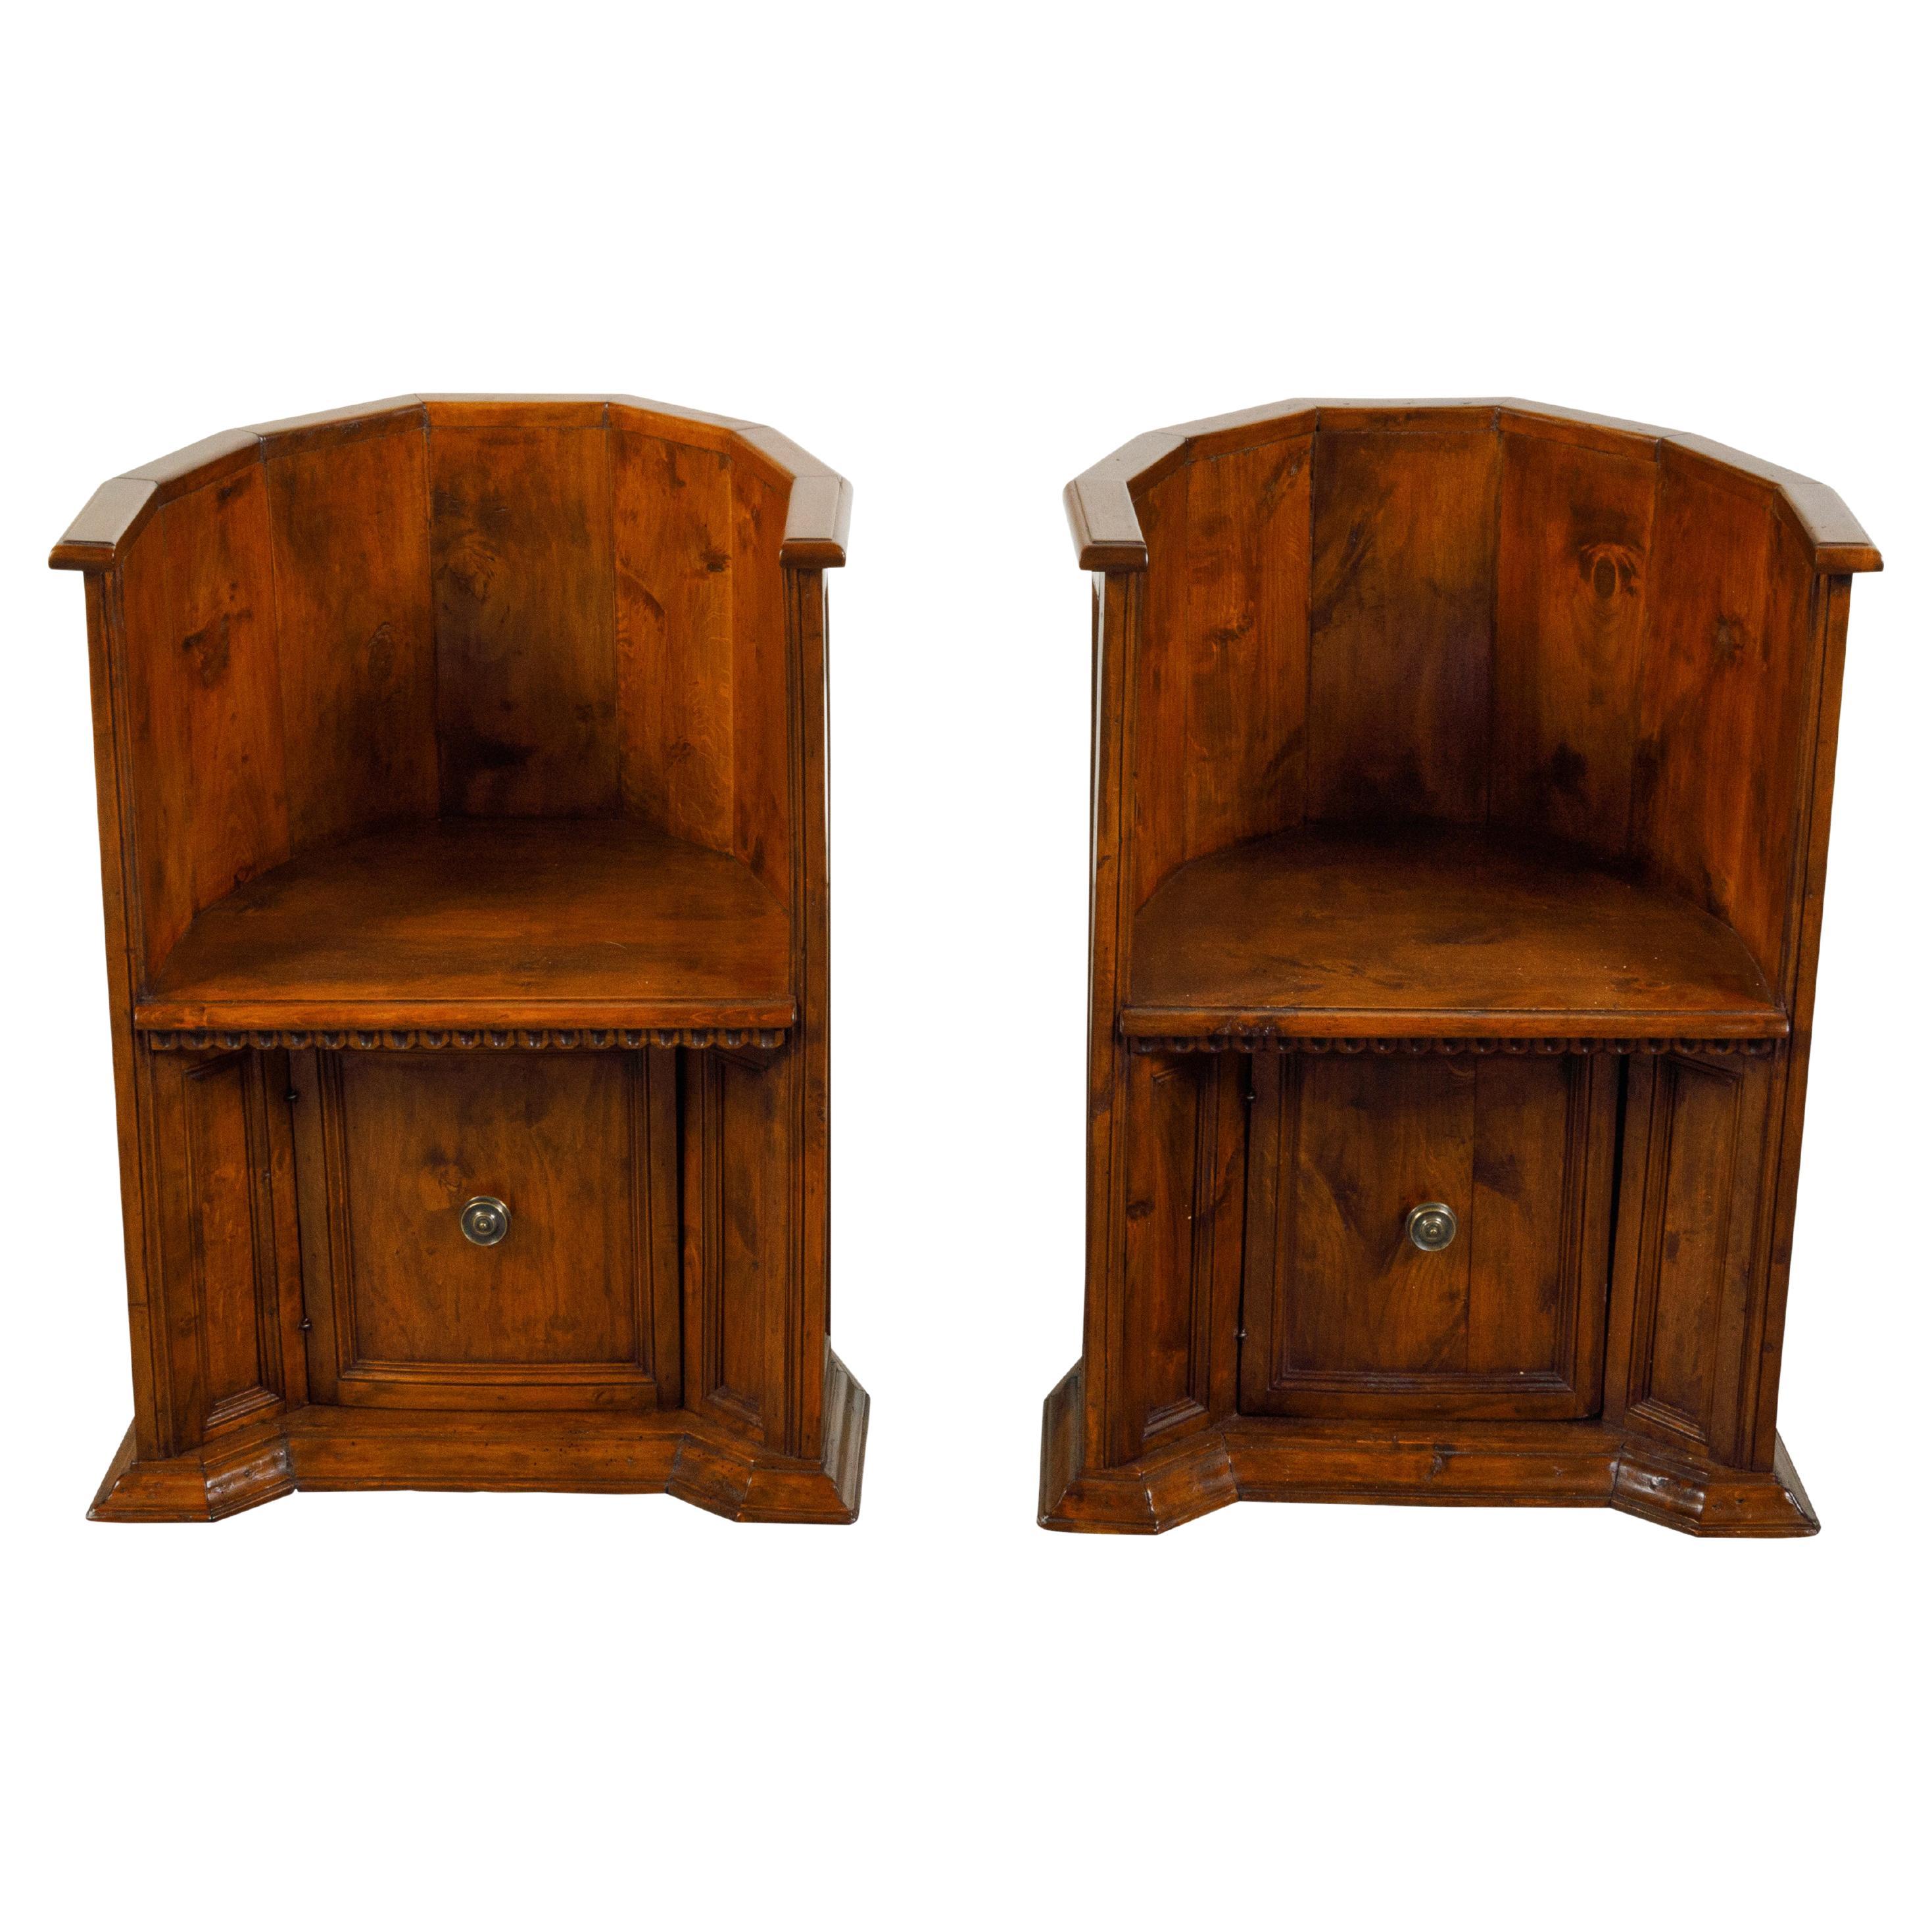 Pair of Italian 19th Century Renaissance Style Wooden Chairs with Lower Doors For Sale